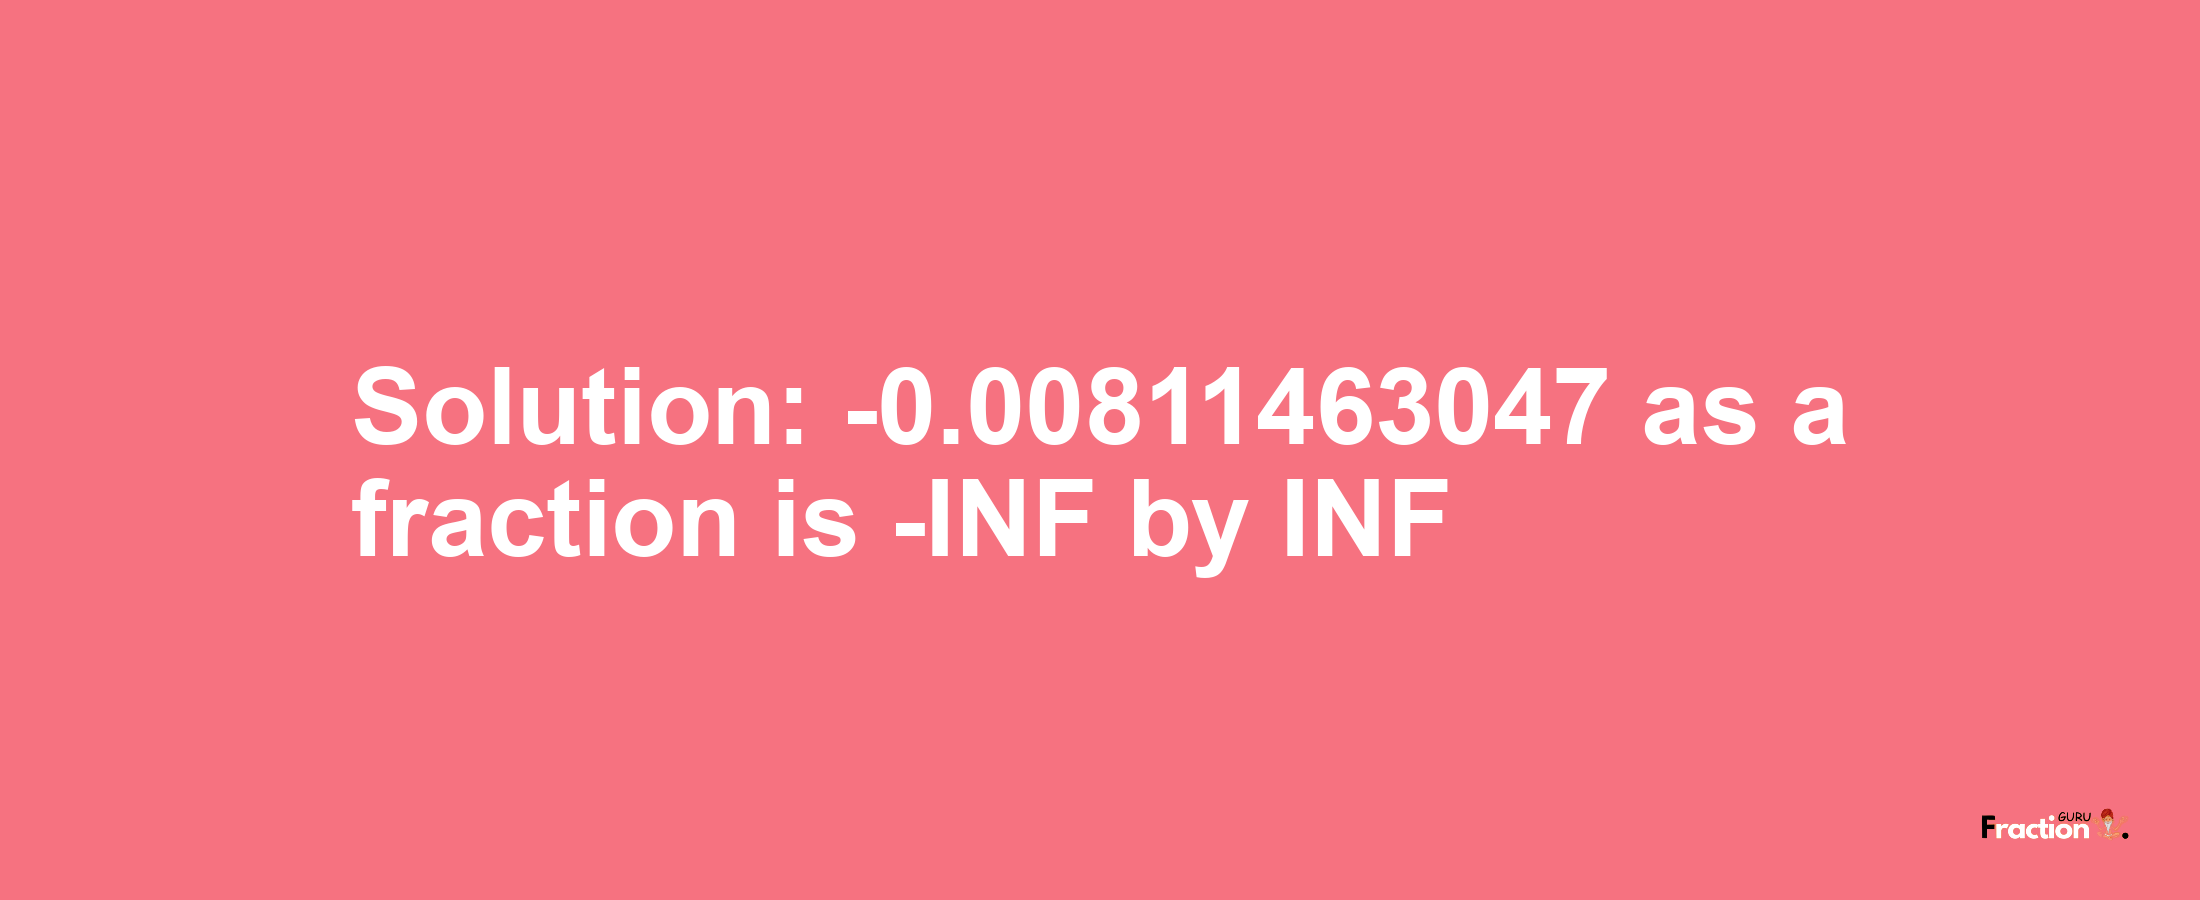 Solution:-0.00811463047 as a fraction is -INF/INF